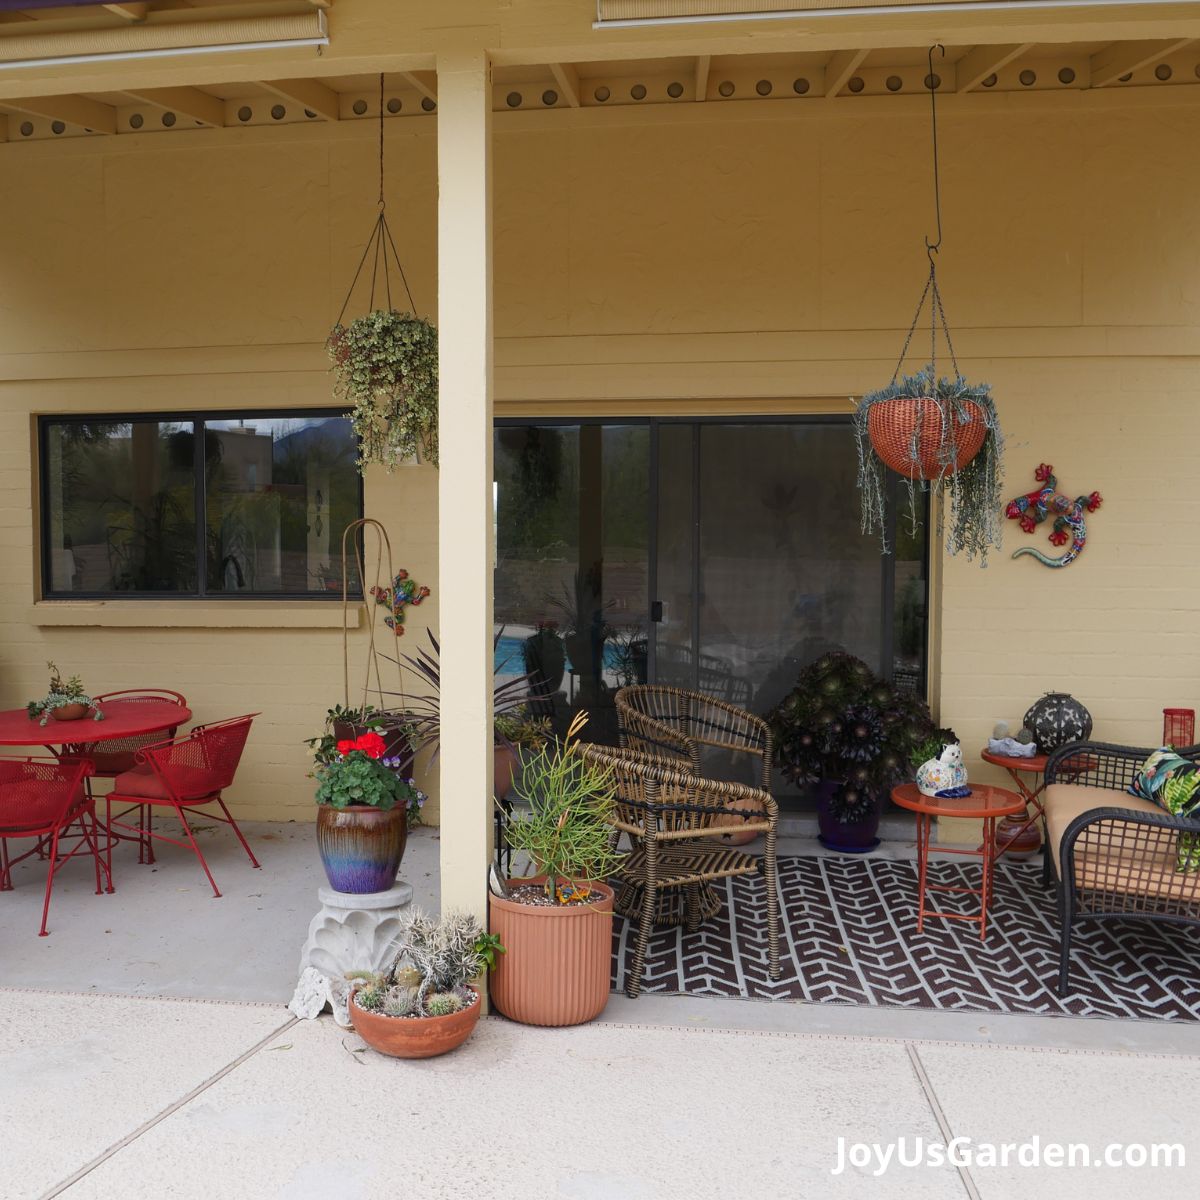 back patio shown with table and chairs and additional chair seating, a variety of flowers, cactus, and succulents potted and hanging